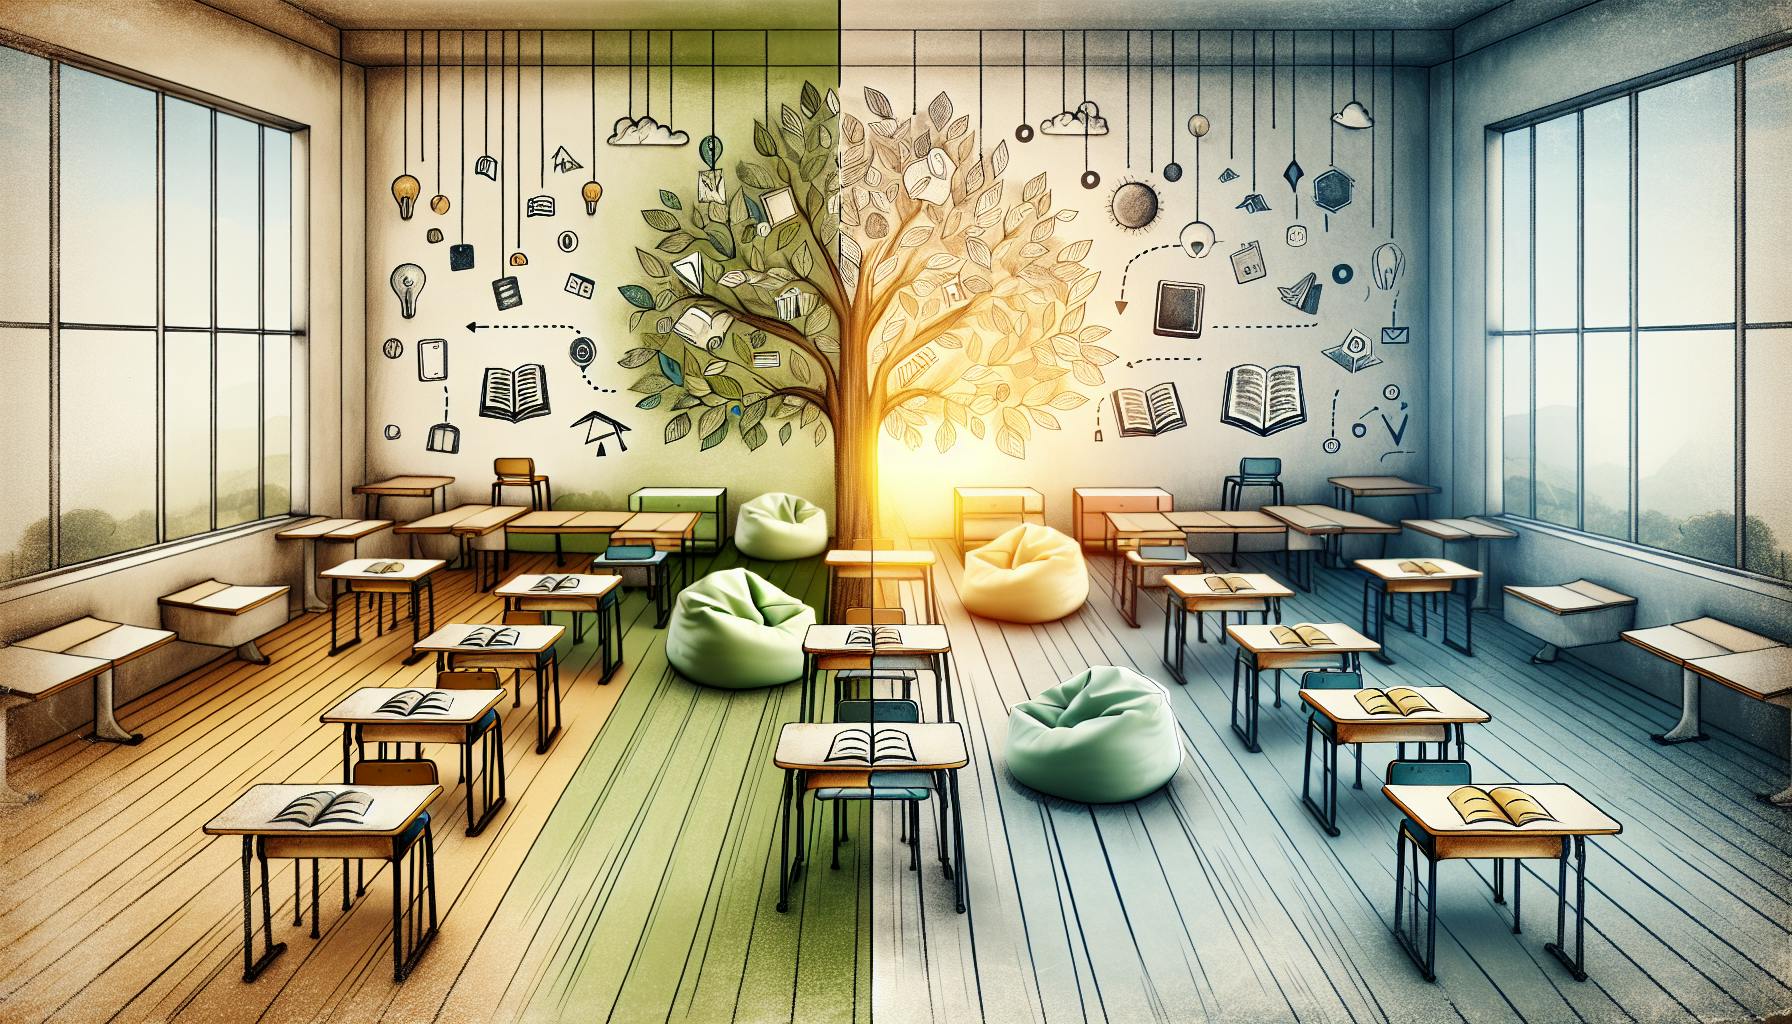 Flipped Classrooms: Rethinking Homework and Class Time for Better Learning